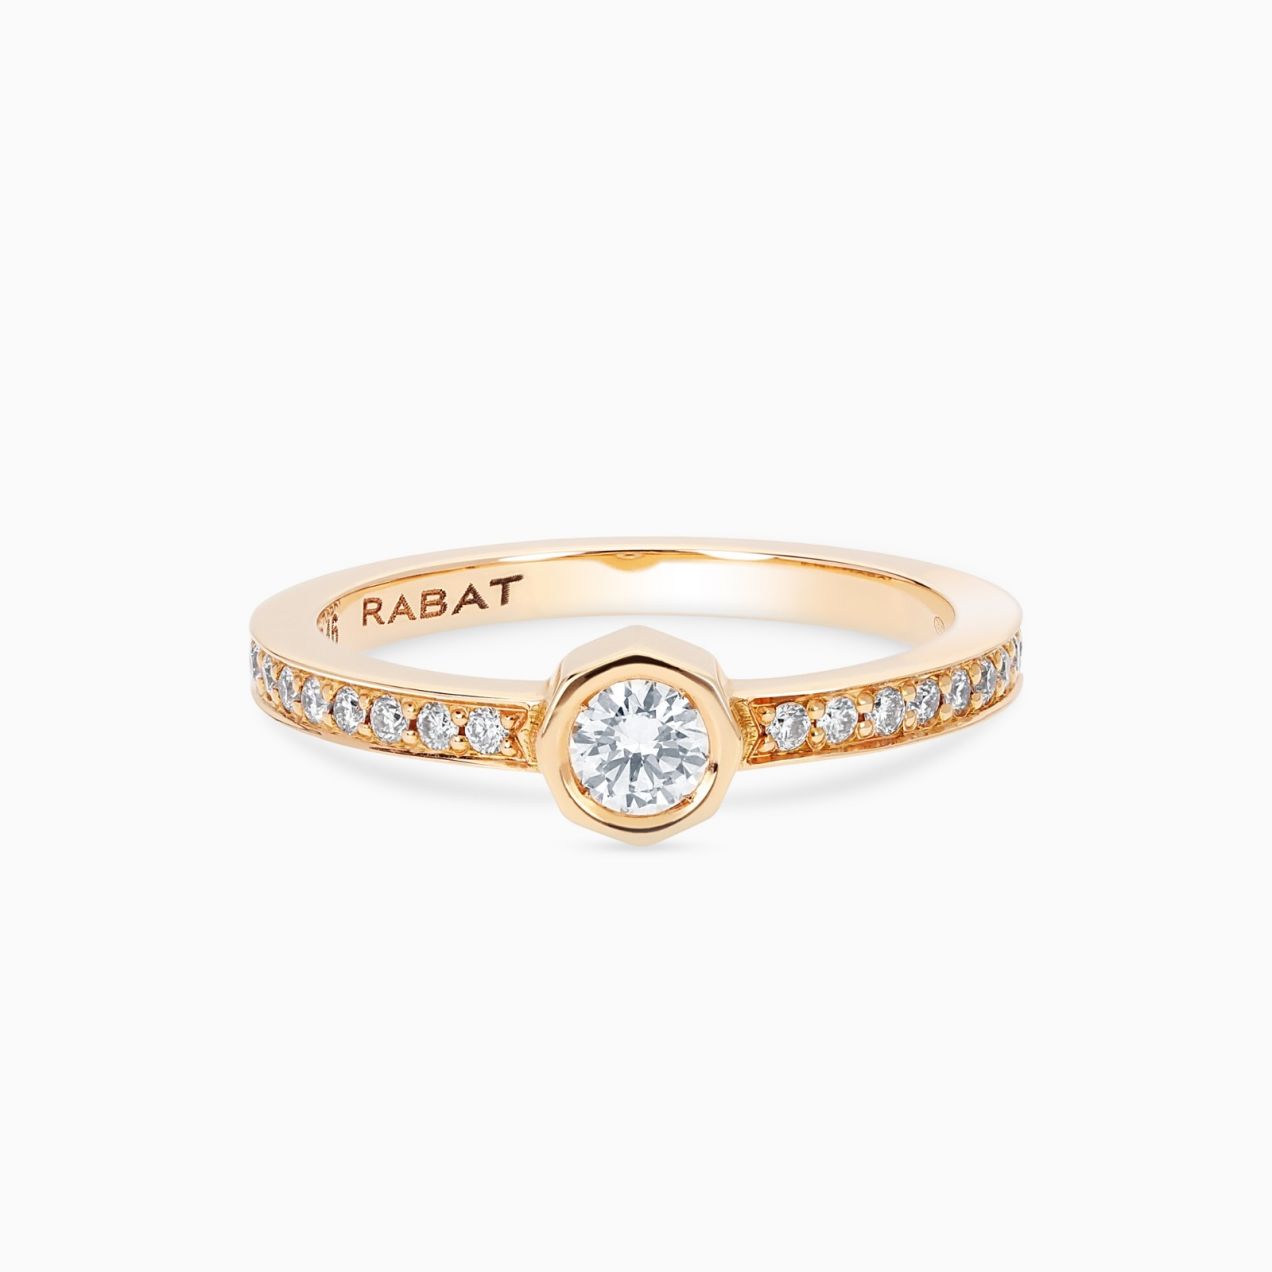 Solitaire ring in rose gold with a central diamond and diamond band